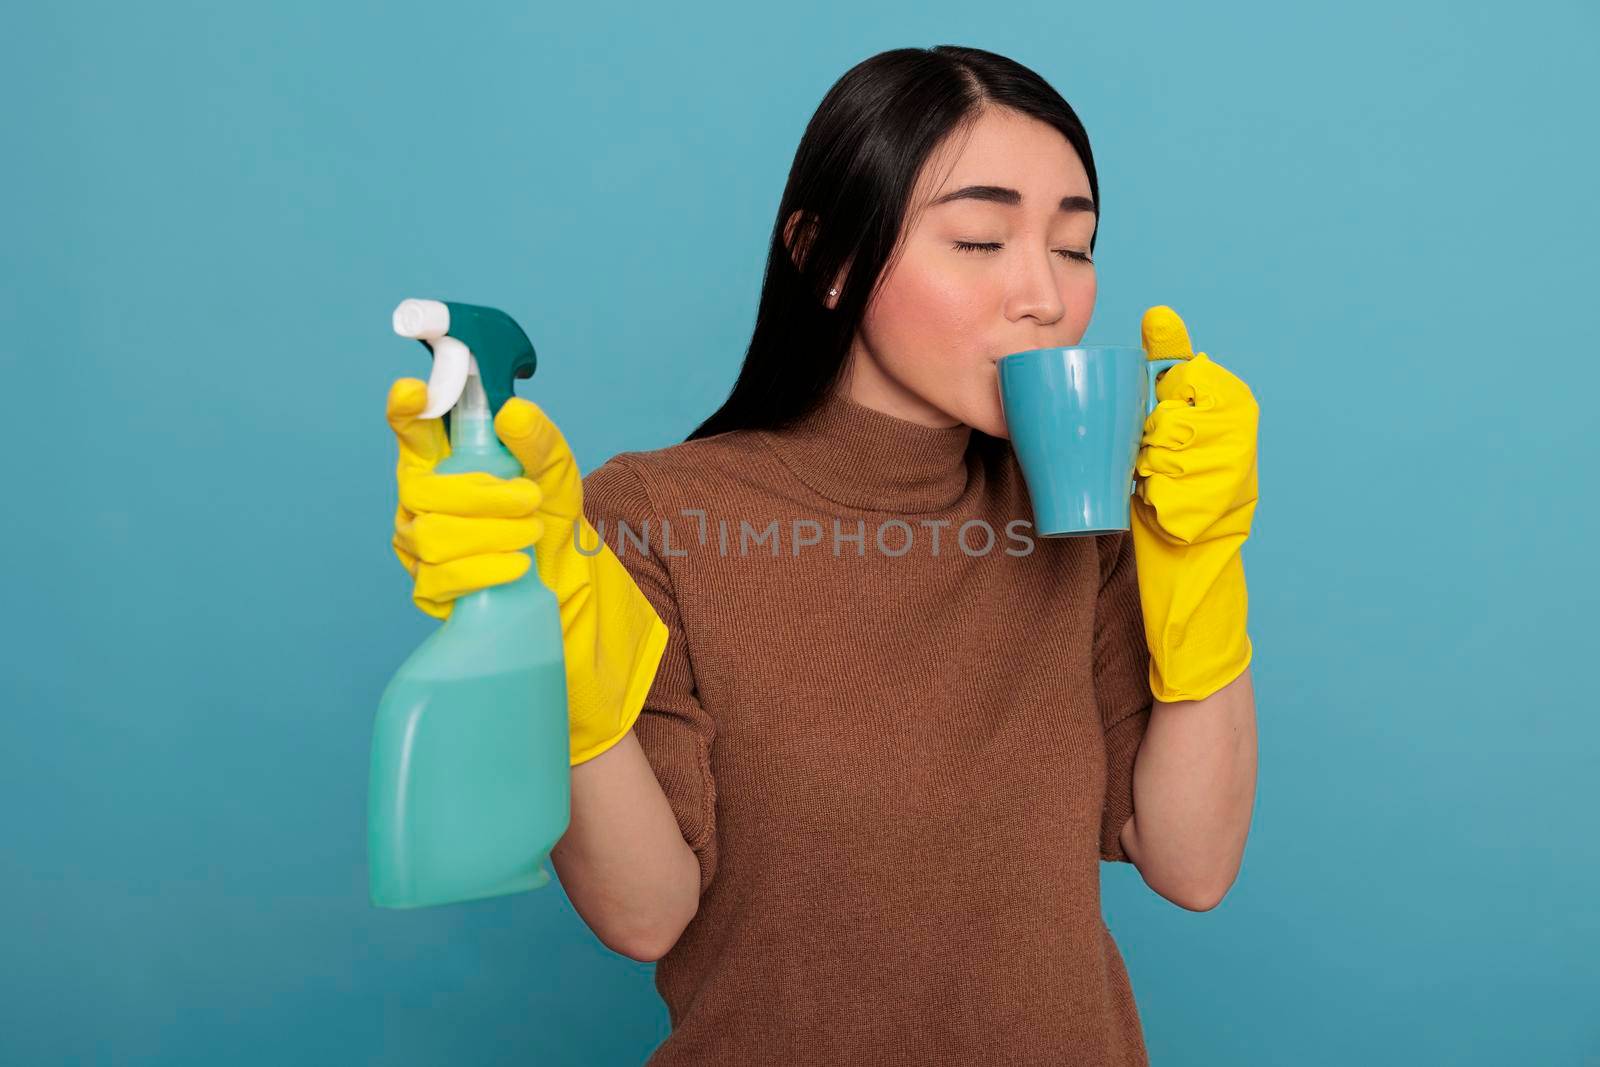 Tired exhausted young asian housewife taking coffee during work break while holding a sponge in the other hand, Cleaning home concept, Refreshment tea take some rest from day to day chores,